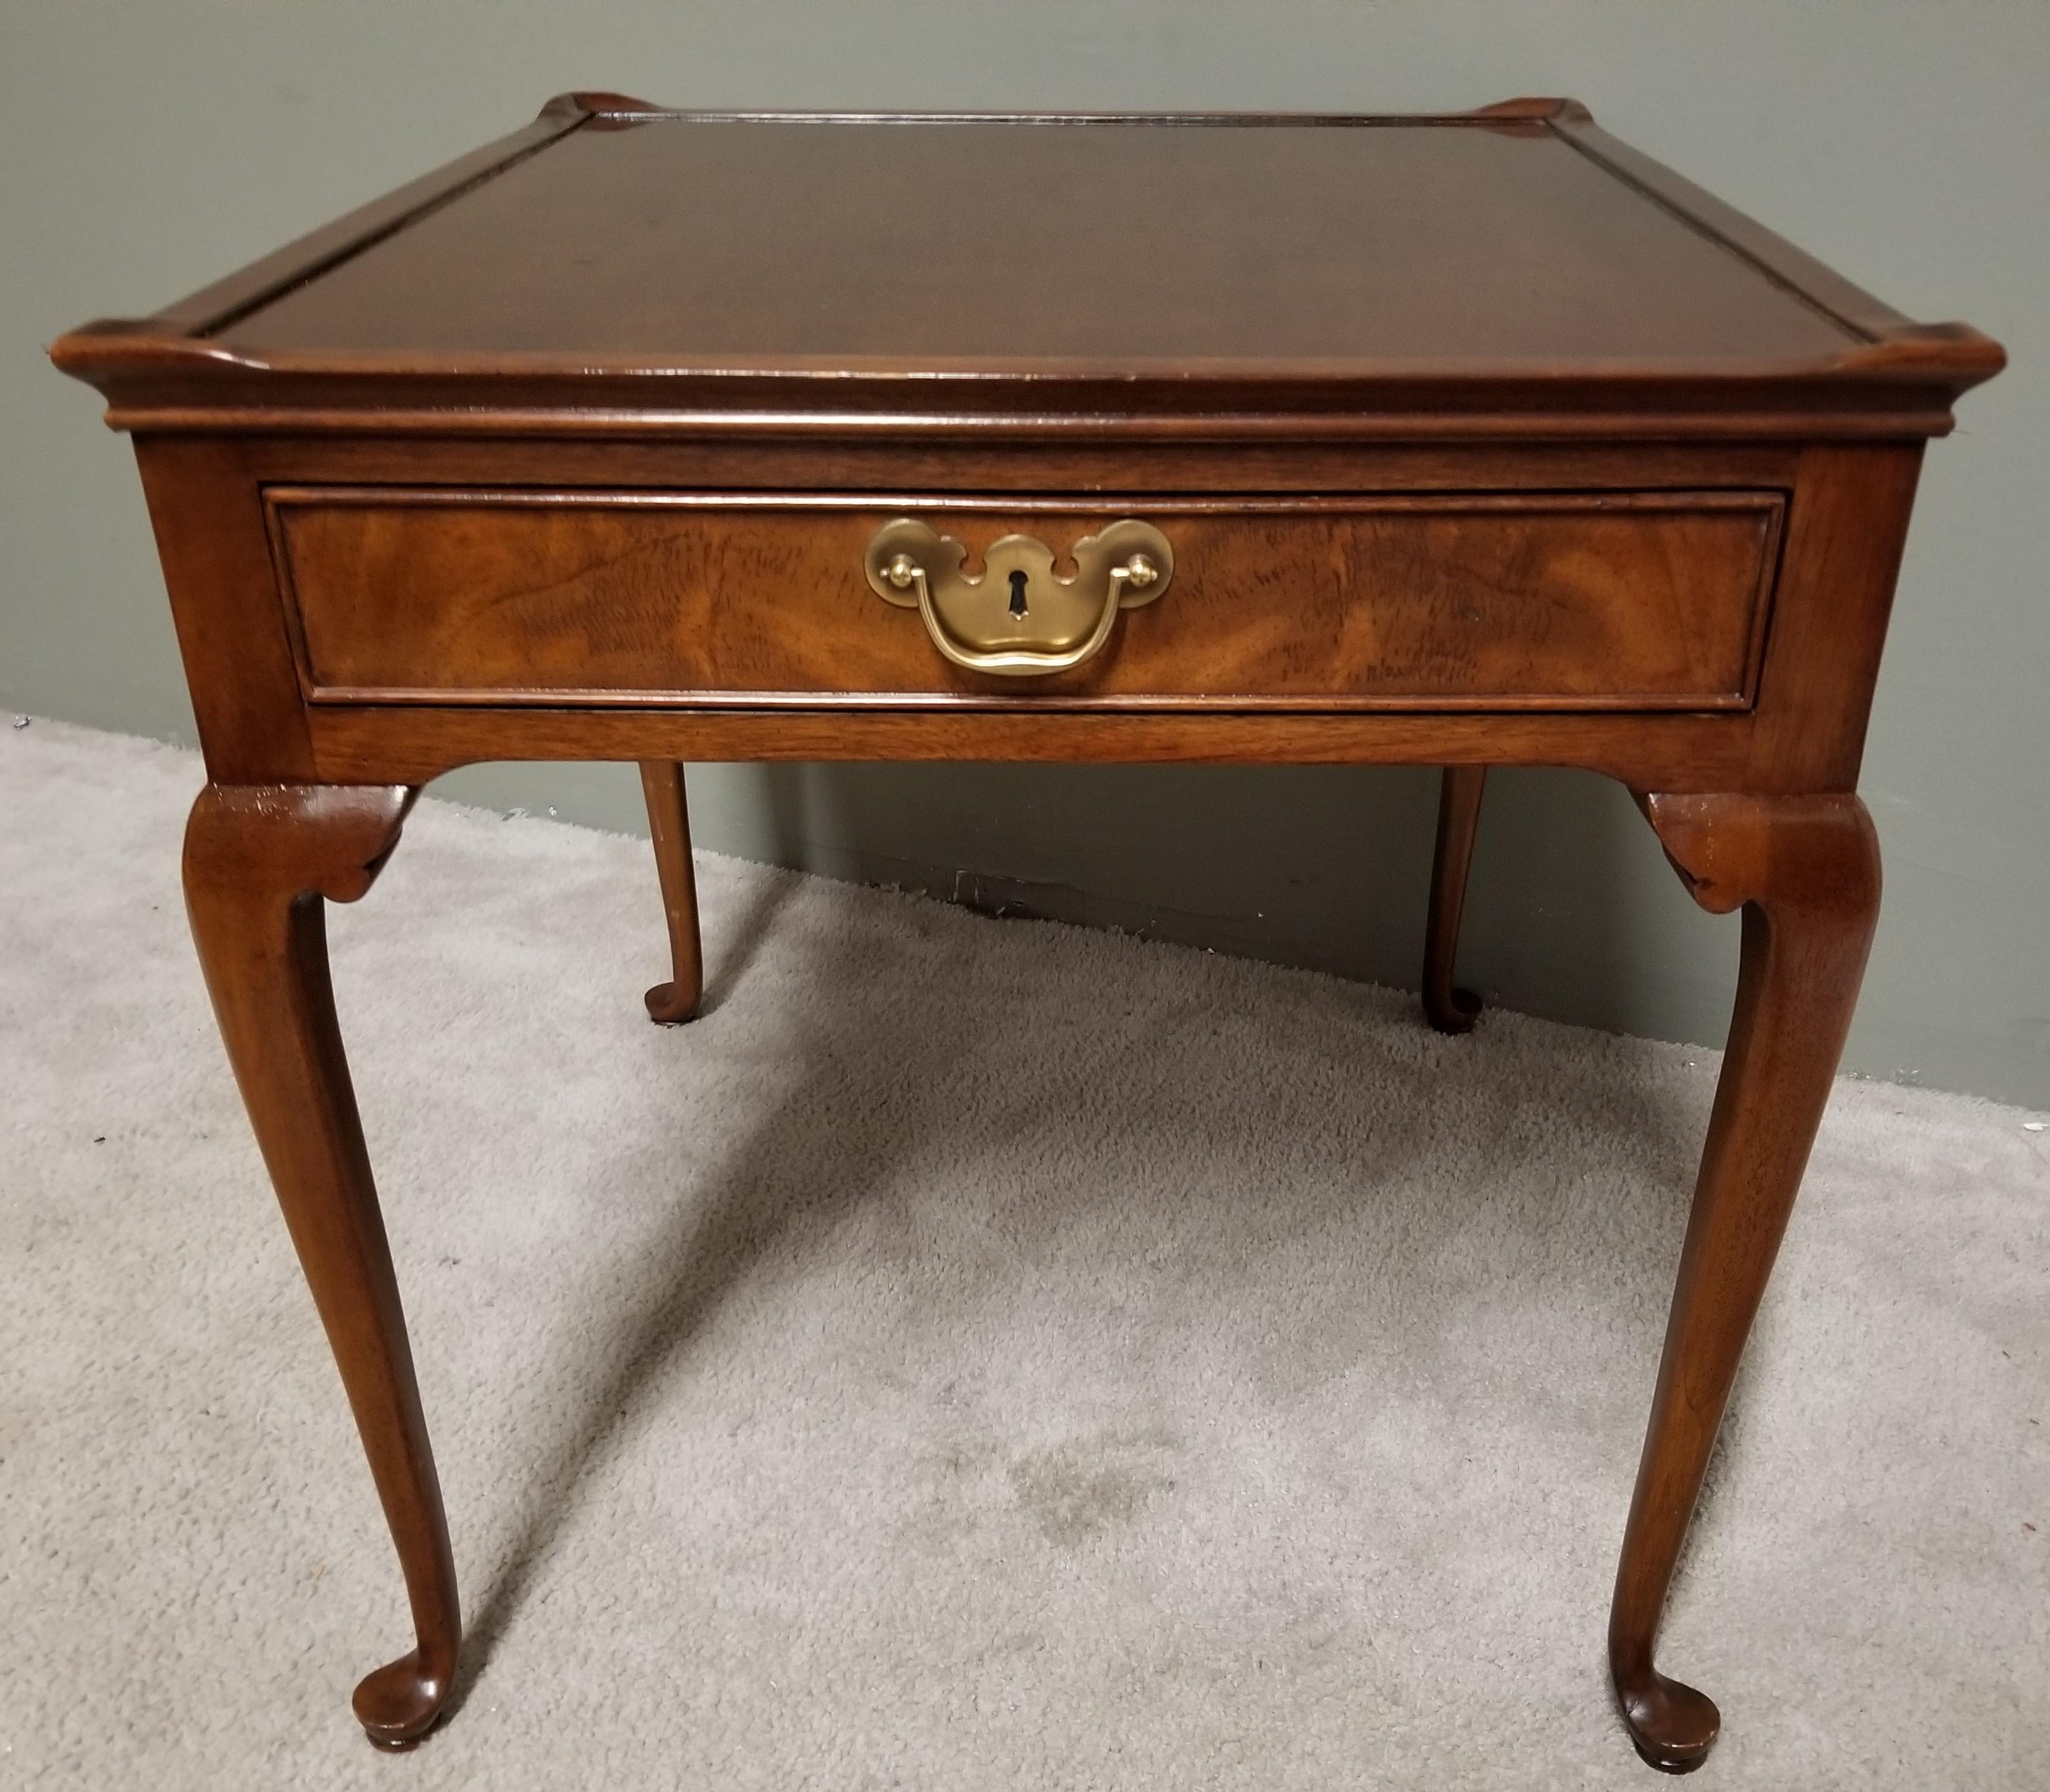 Offering one of our recent palm beach estate fine furniture acquisitions of a 
Classic Wellington Hall Queen Anne Mahogany End Side Table with Flame Mahogany Front Drawer

Approximate Measurements in Inches
24